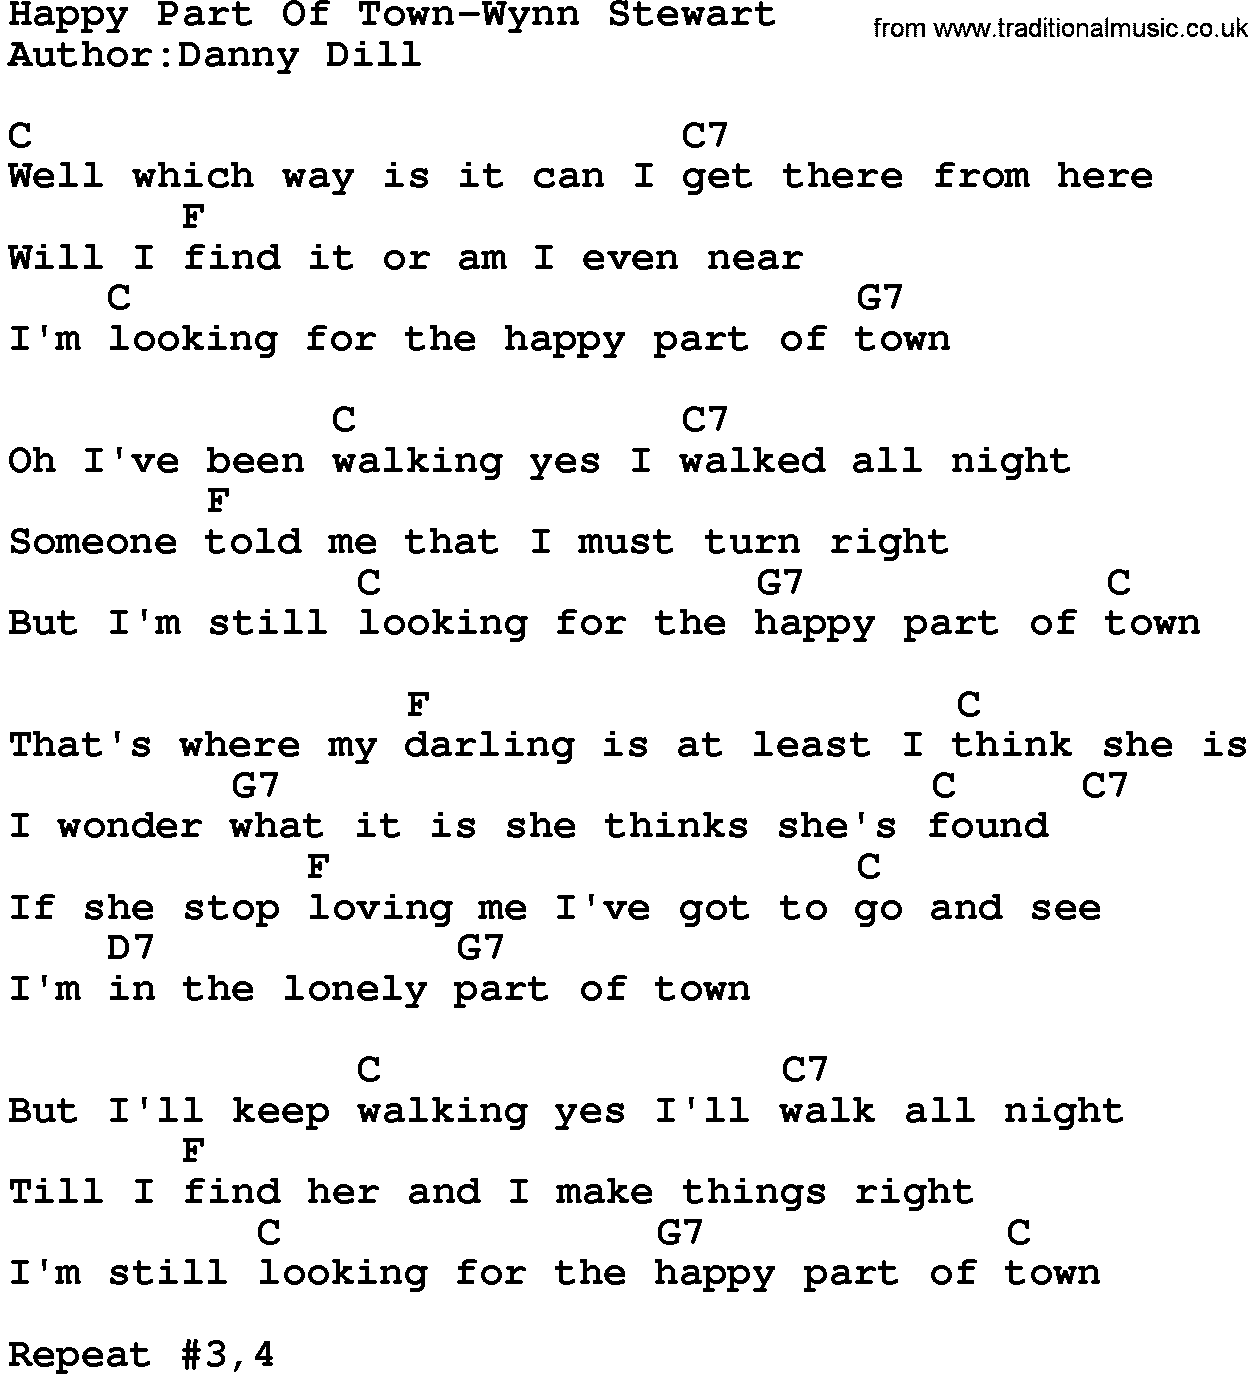 Country music song: Happy Part Of Town-Wynn Stewart lyrics and chords